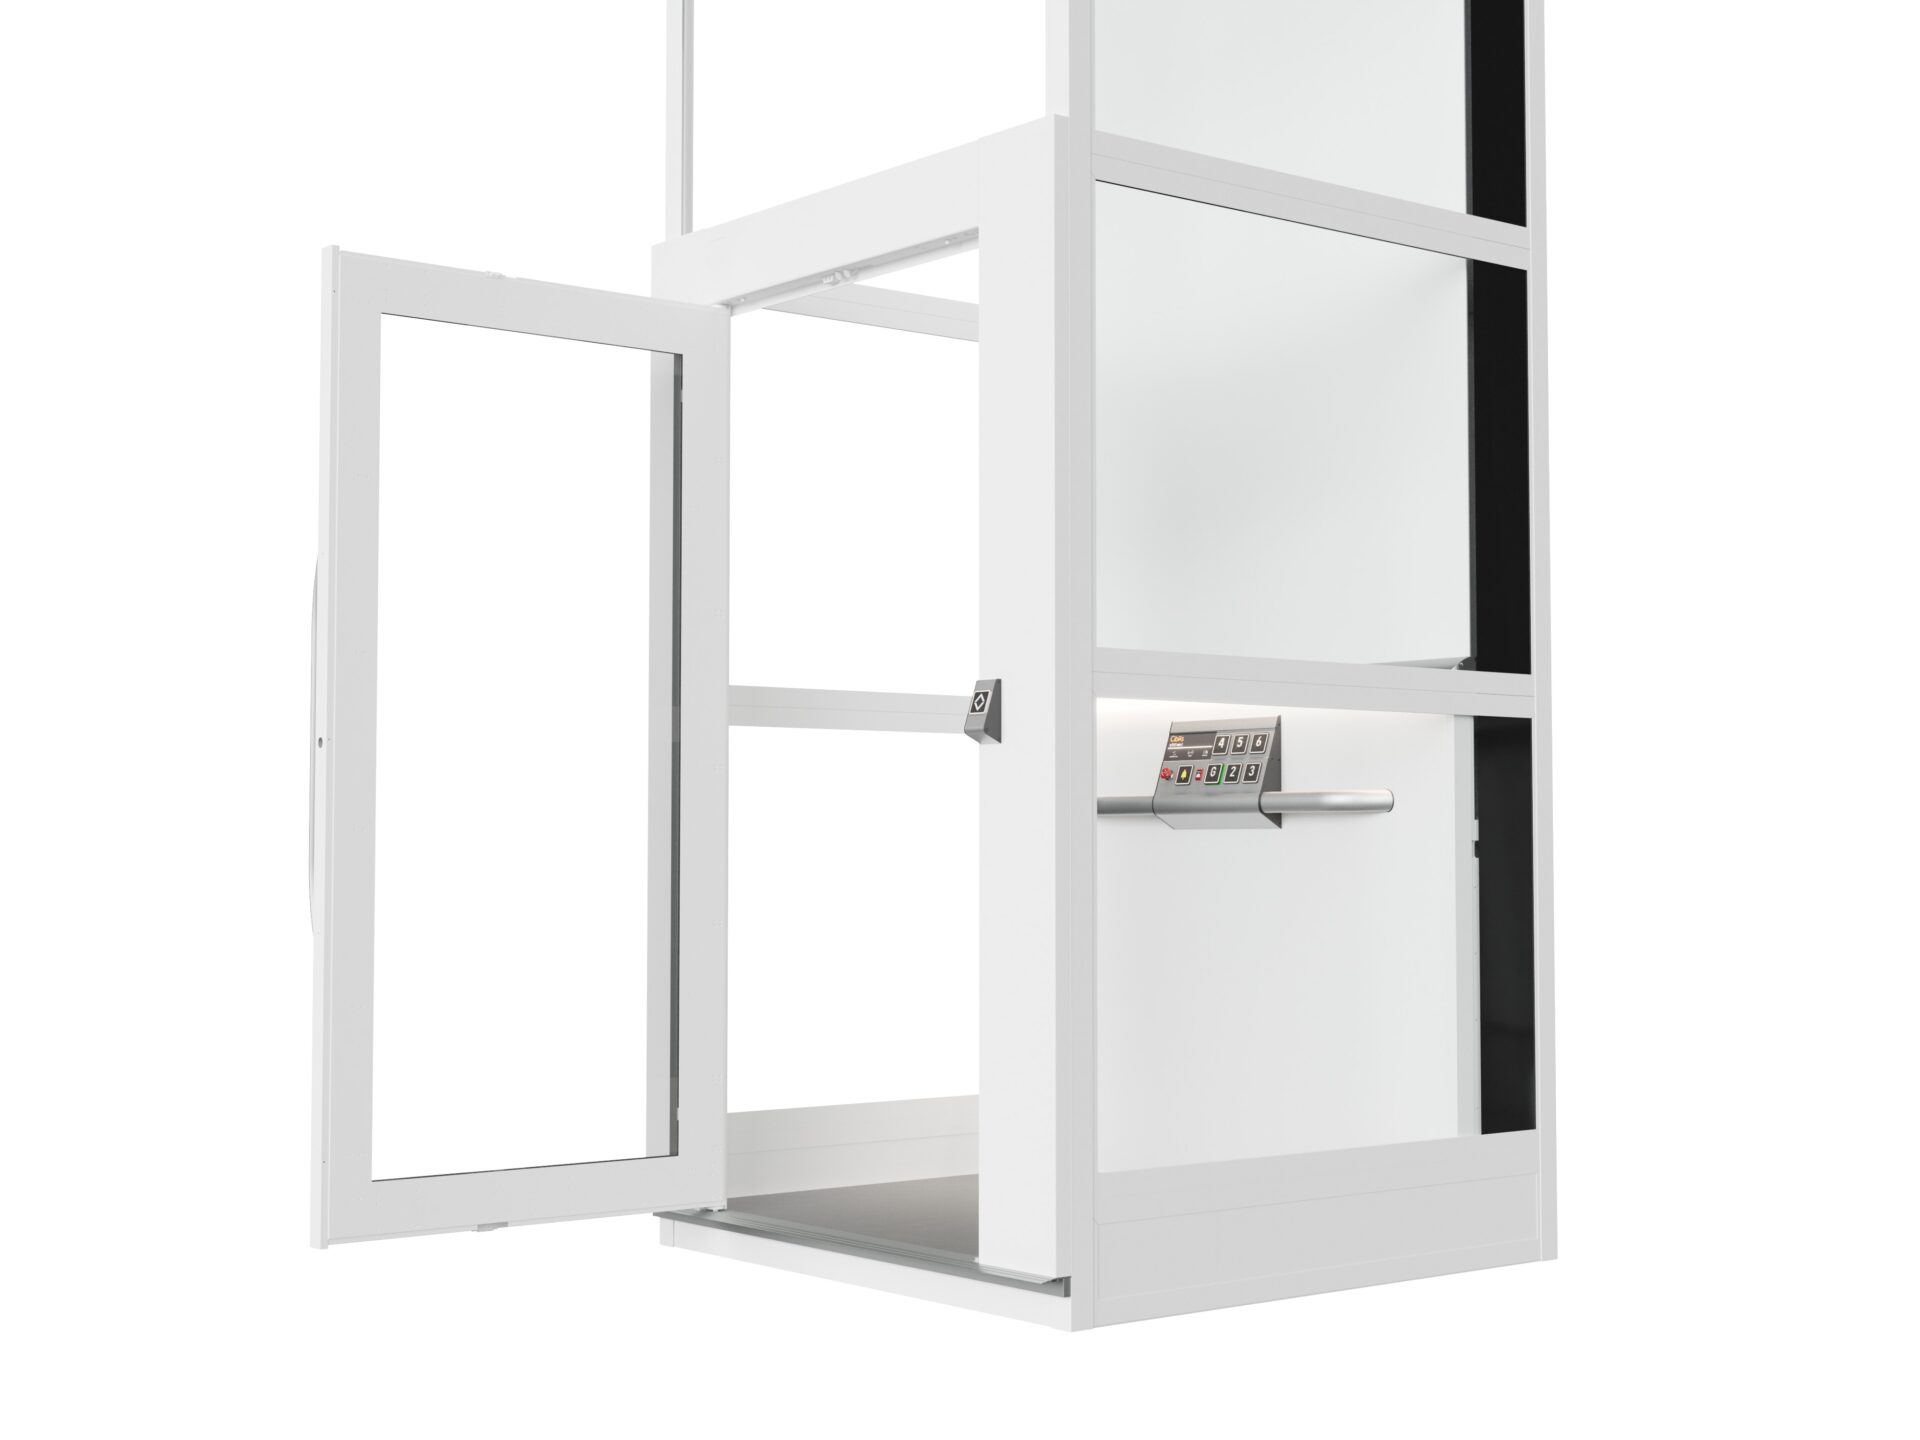 Cibes Home lift 2023 Lifestyle 030 0101 ONE Basic Std GreyIron 3200D8 OrganicSignalWhite with glass metal door opened